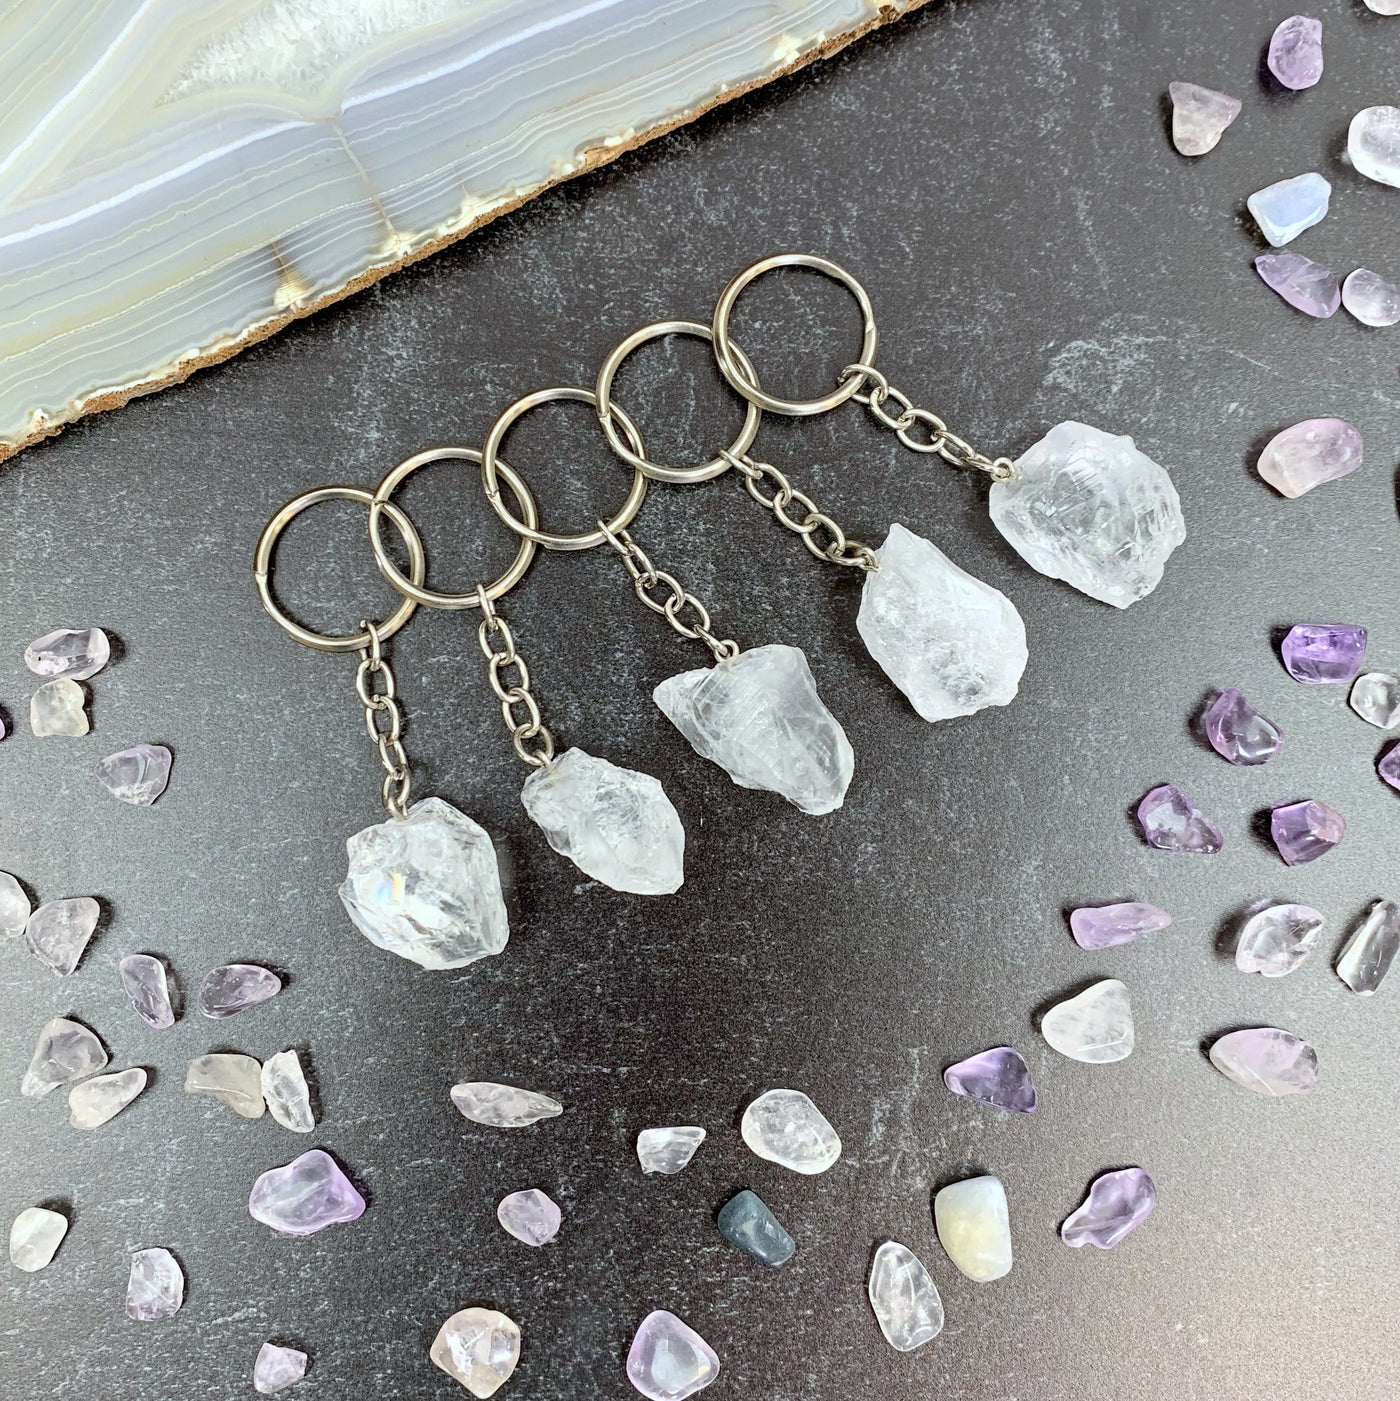 Natural Crystal Keychains - 5 on a table